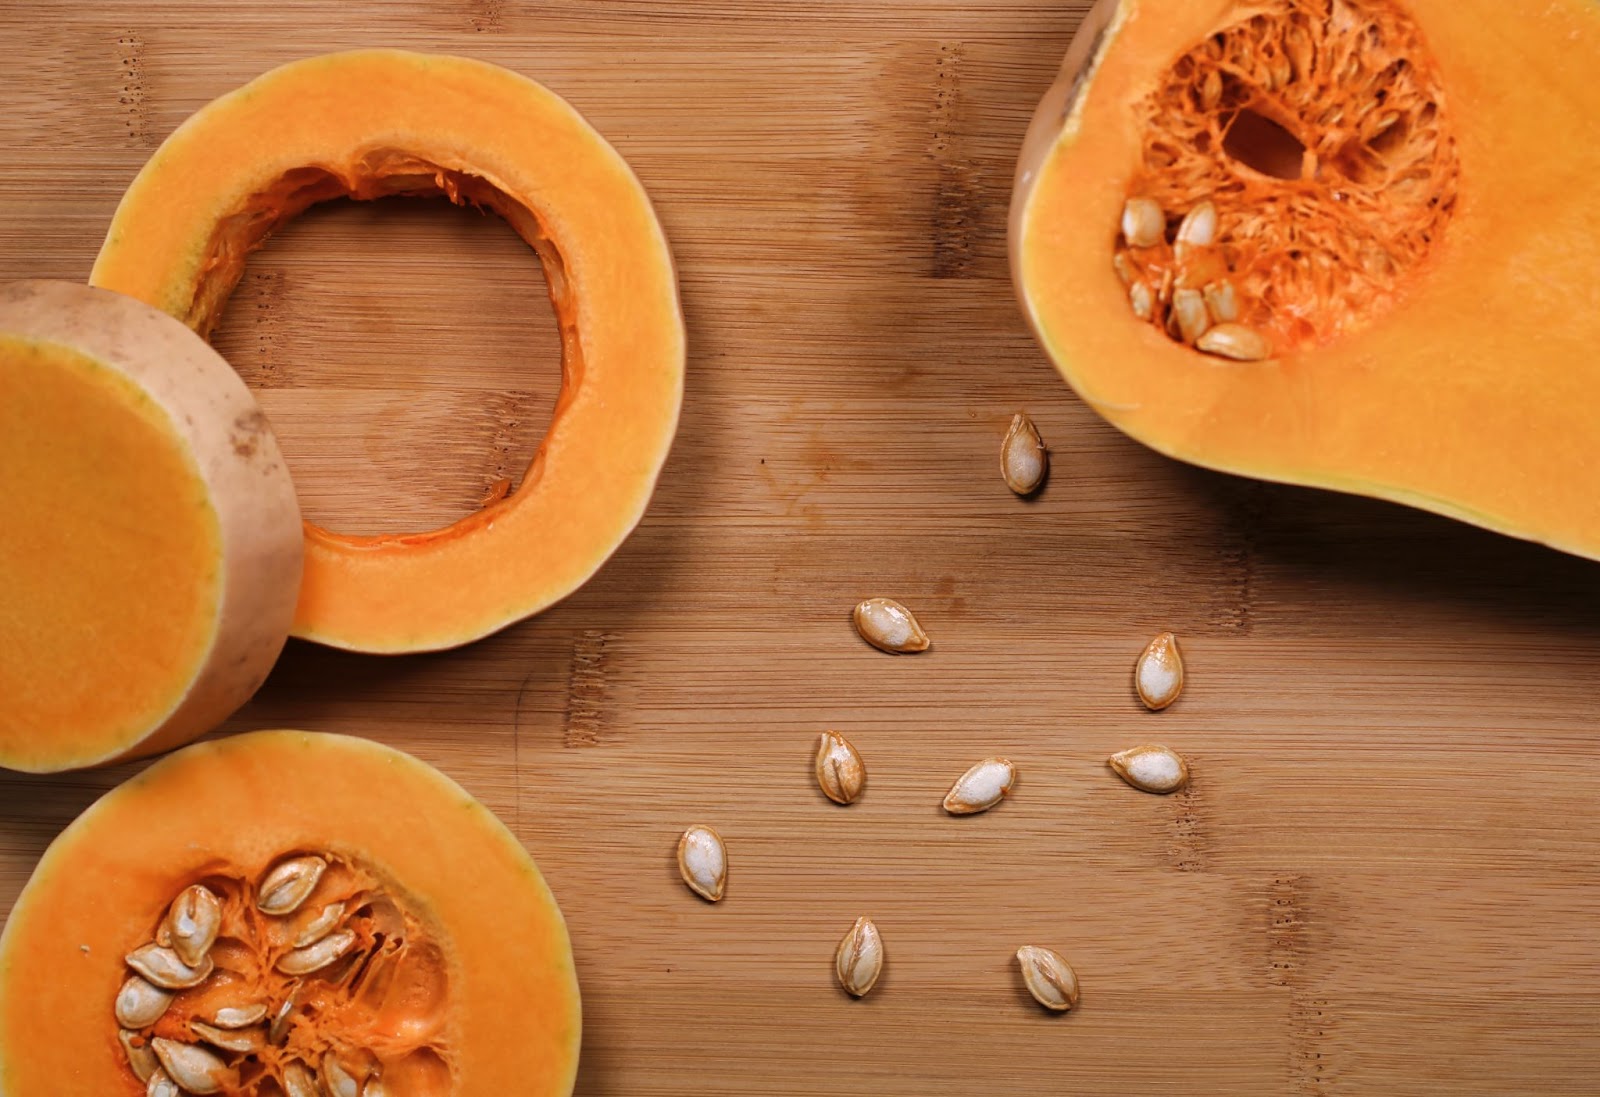 A sliced pumpkin, with some seeds scattered about the table.